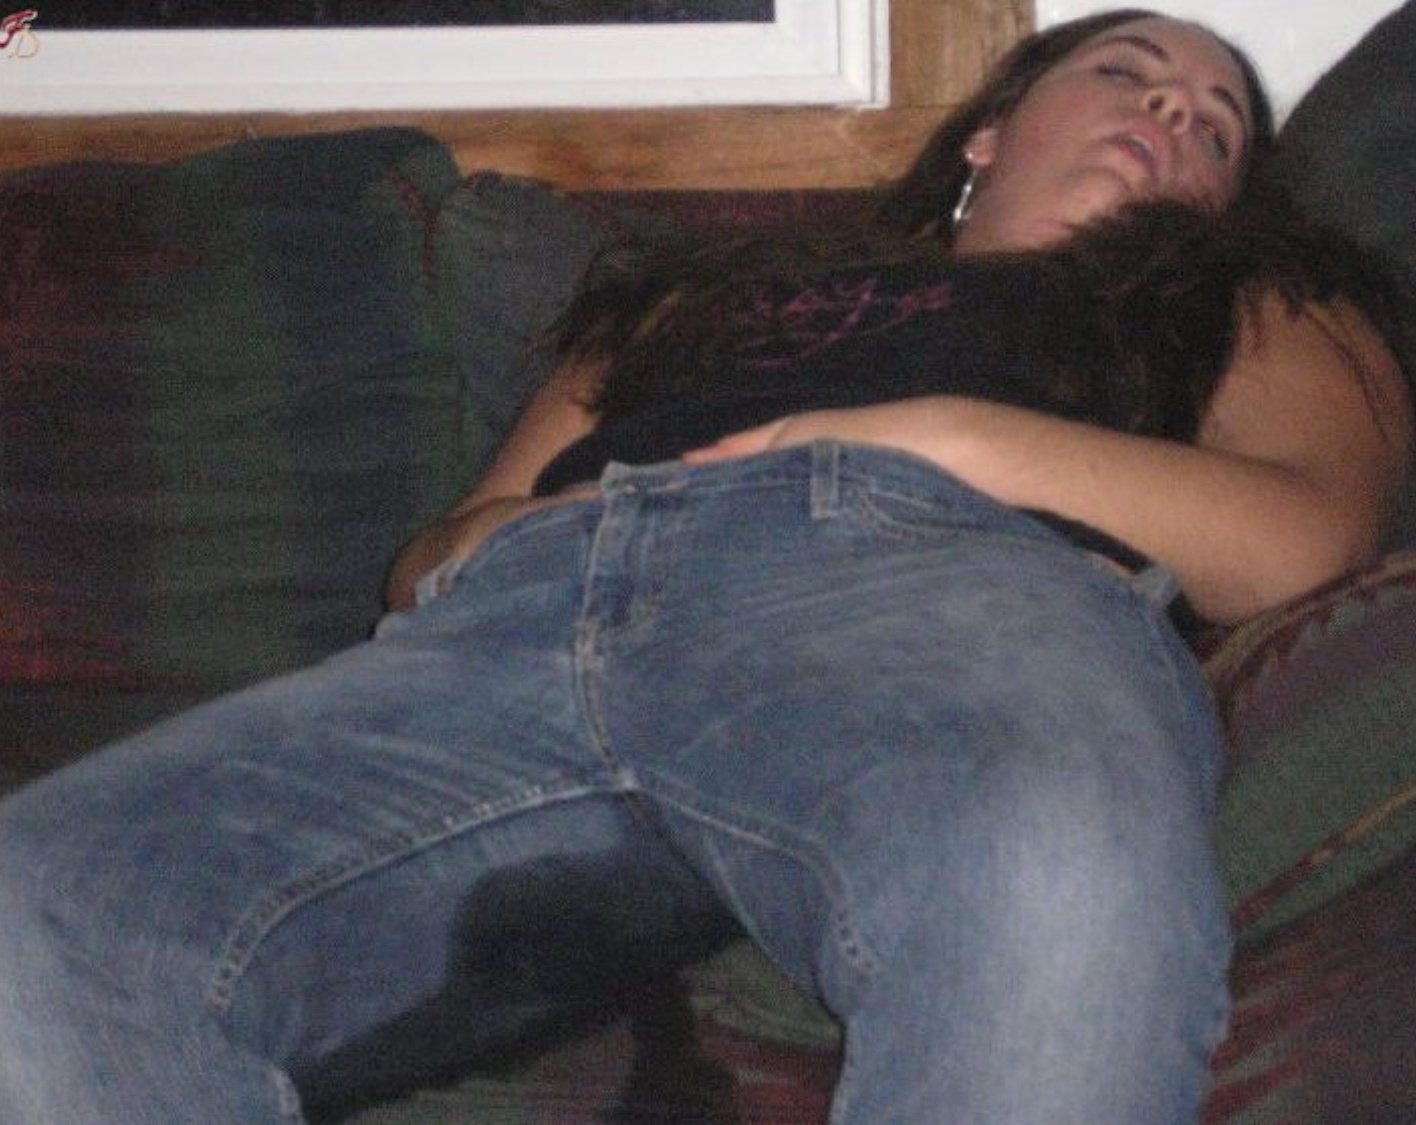 “Drunk girl passed out and peed the sofa” .